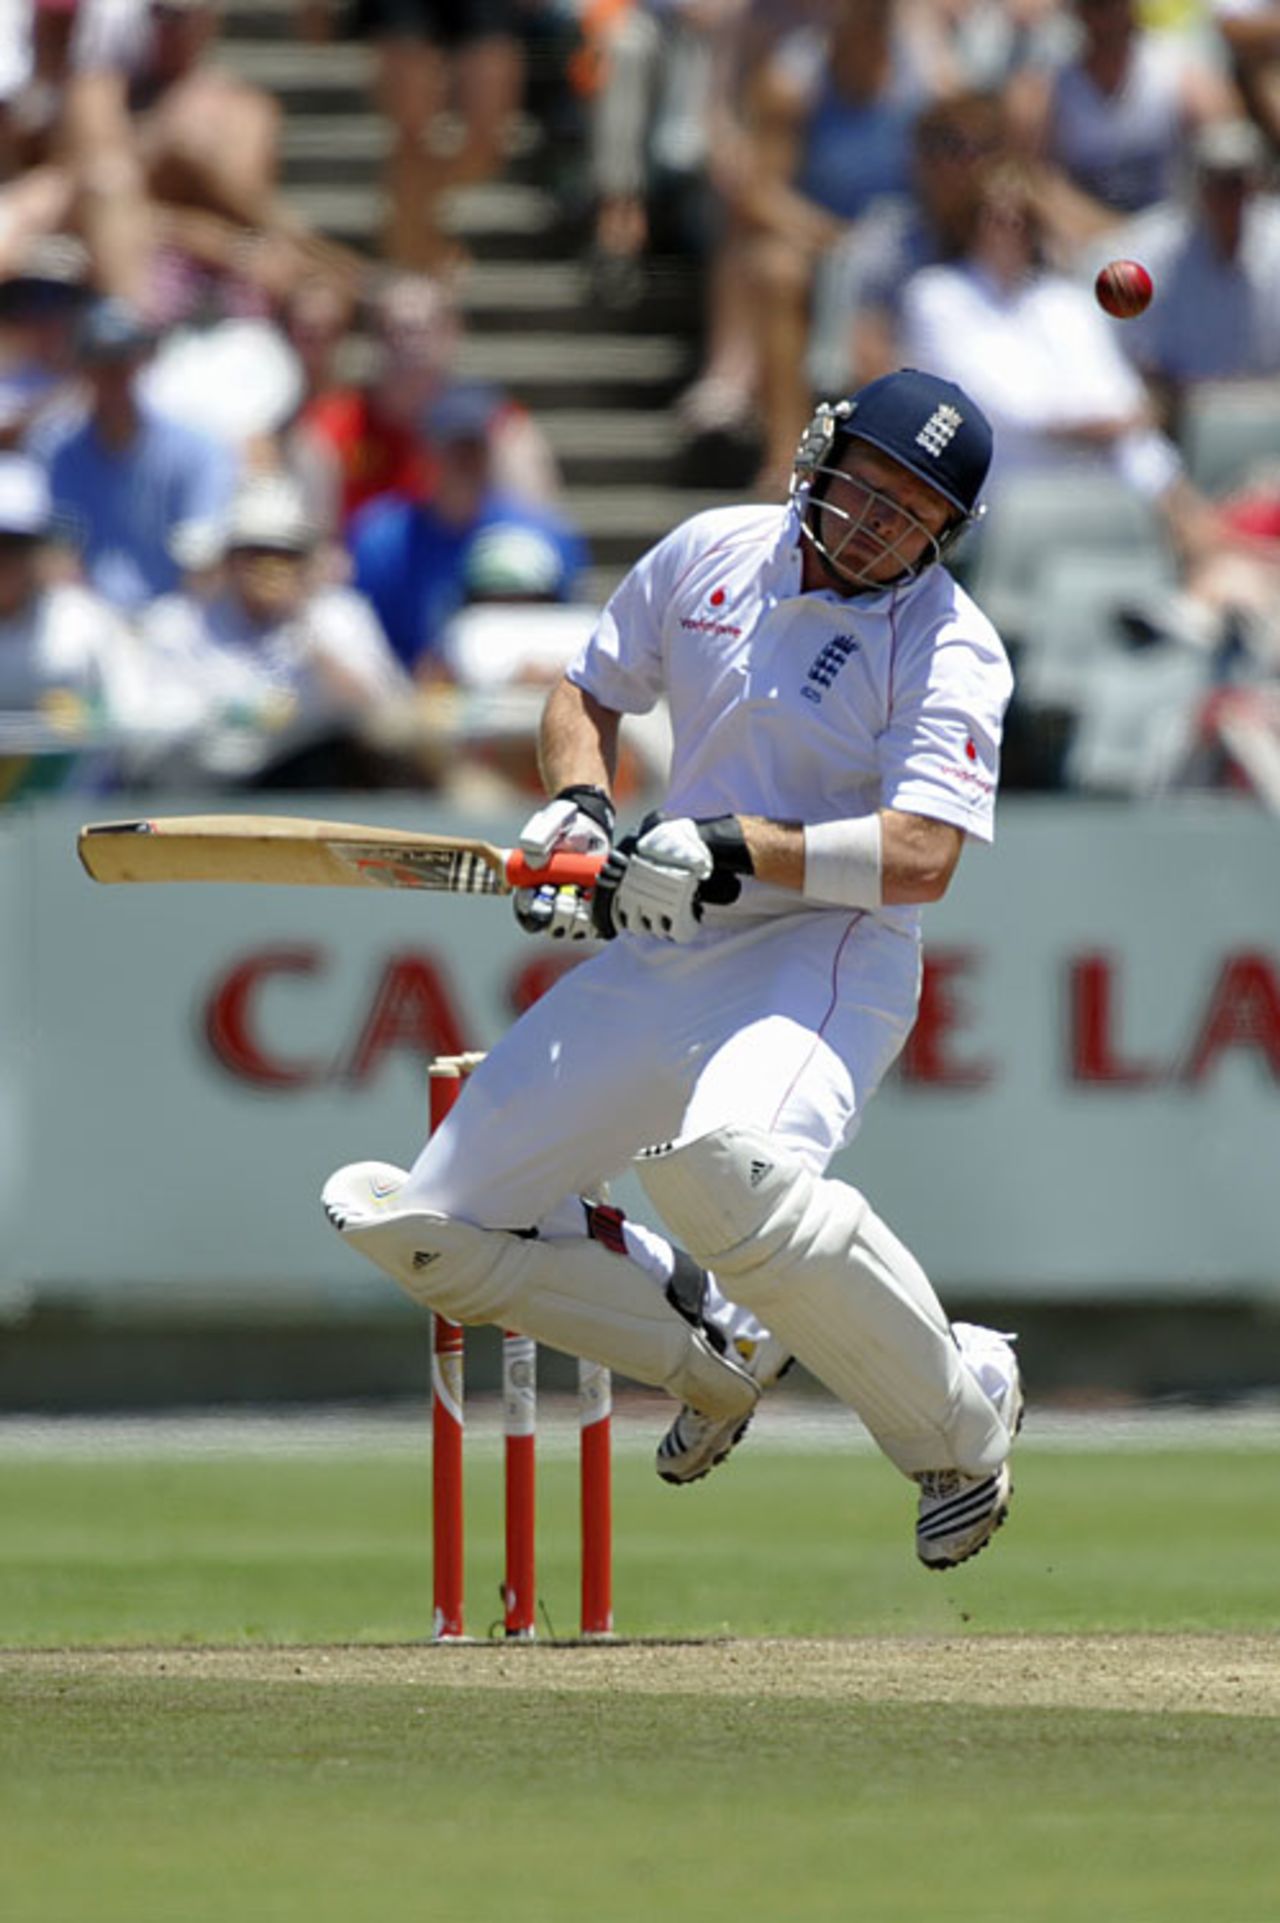 Ian Bell battled through an early short-ball attack at him to share an important stand with Alastair Cook, South Africa v England, 3rd Test, Cape Town, January 4, 2009